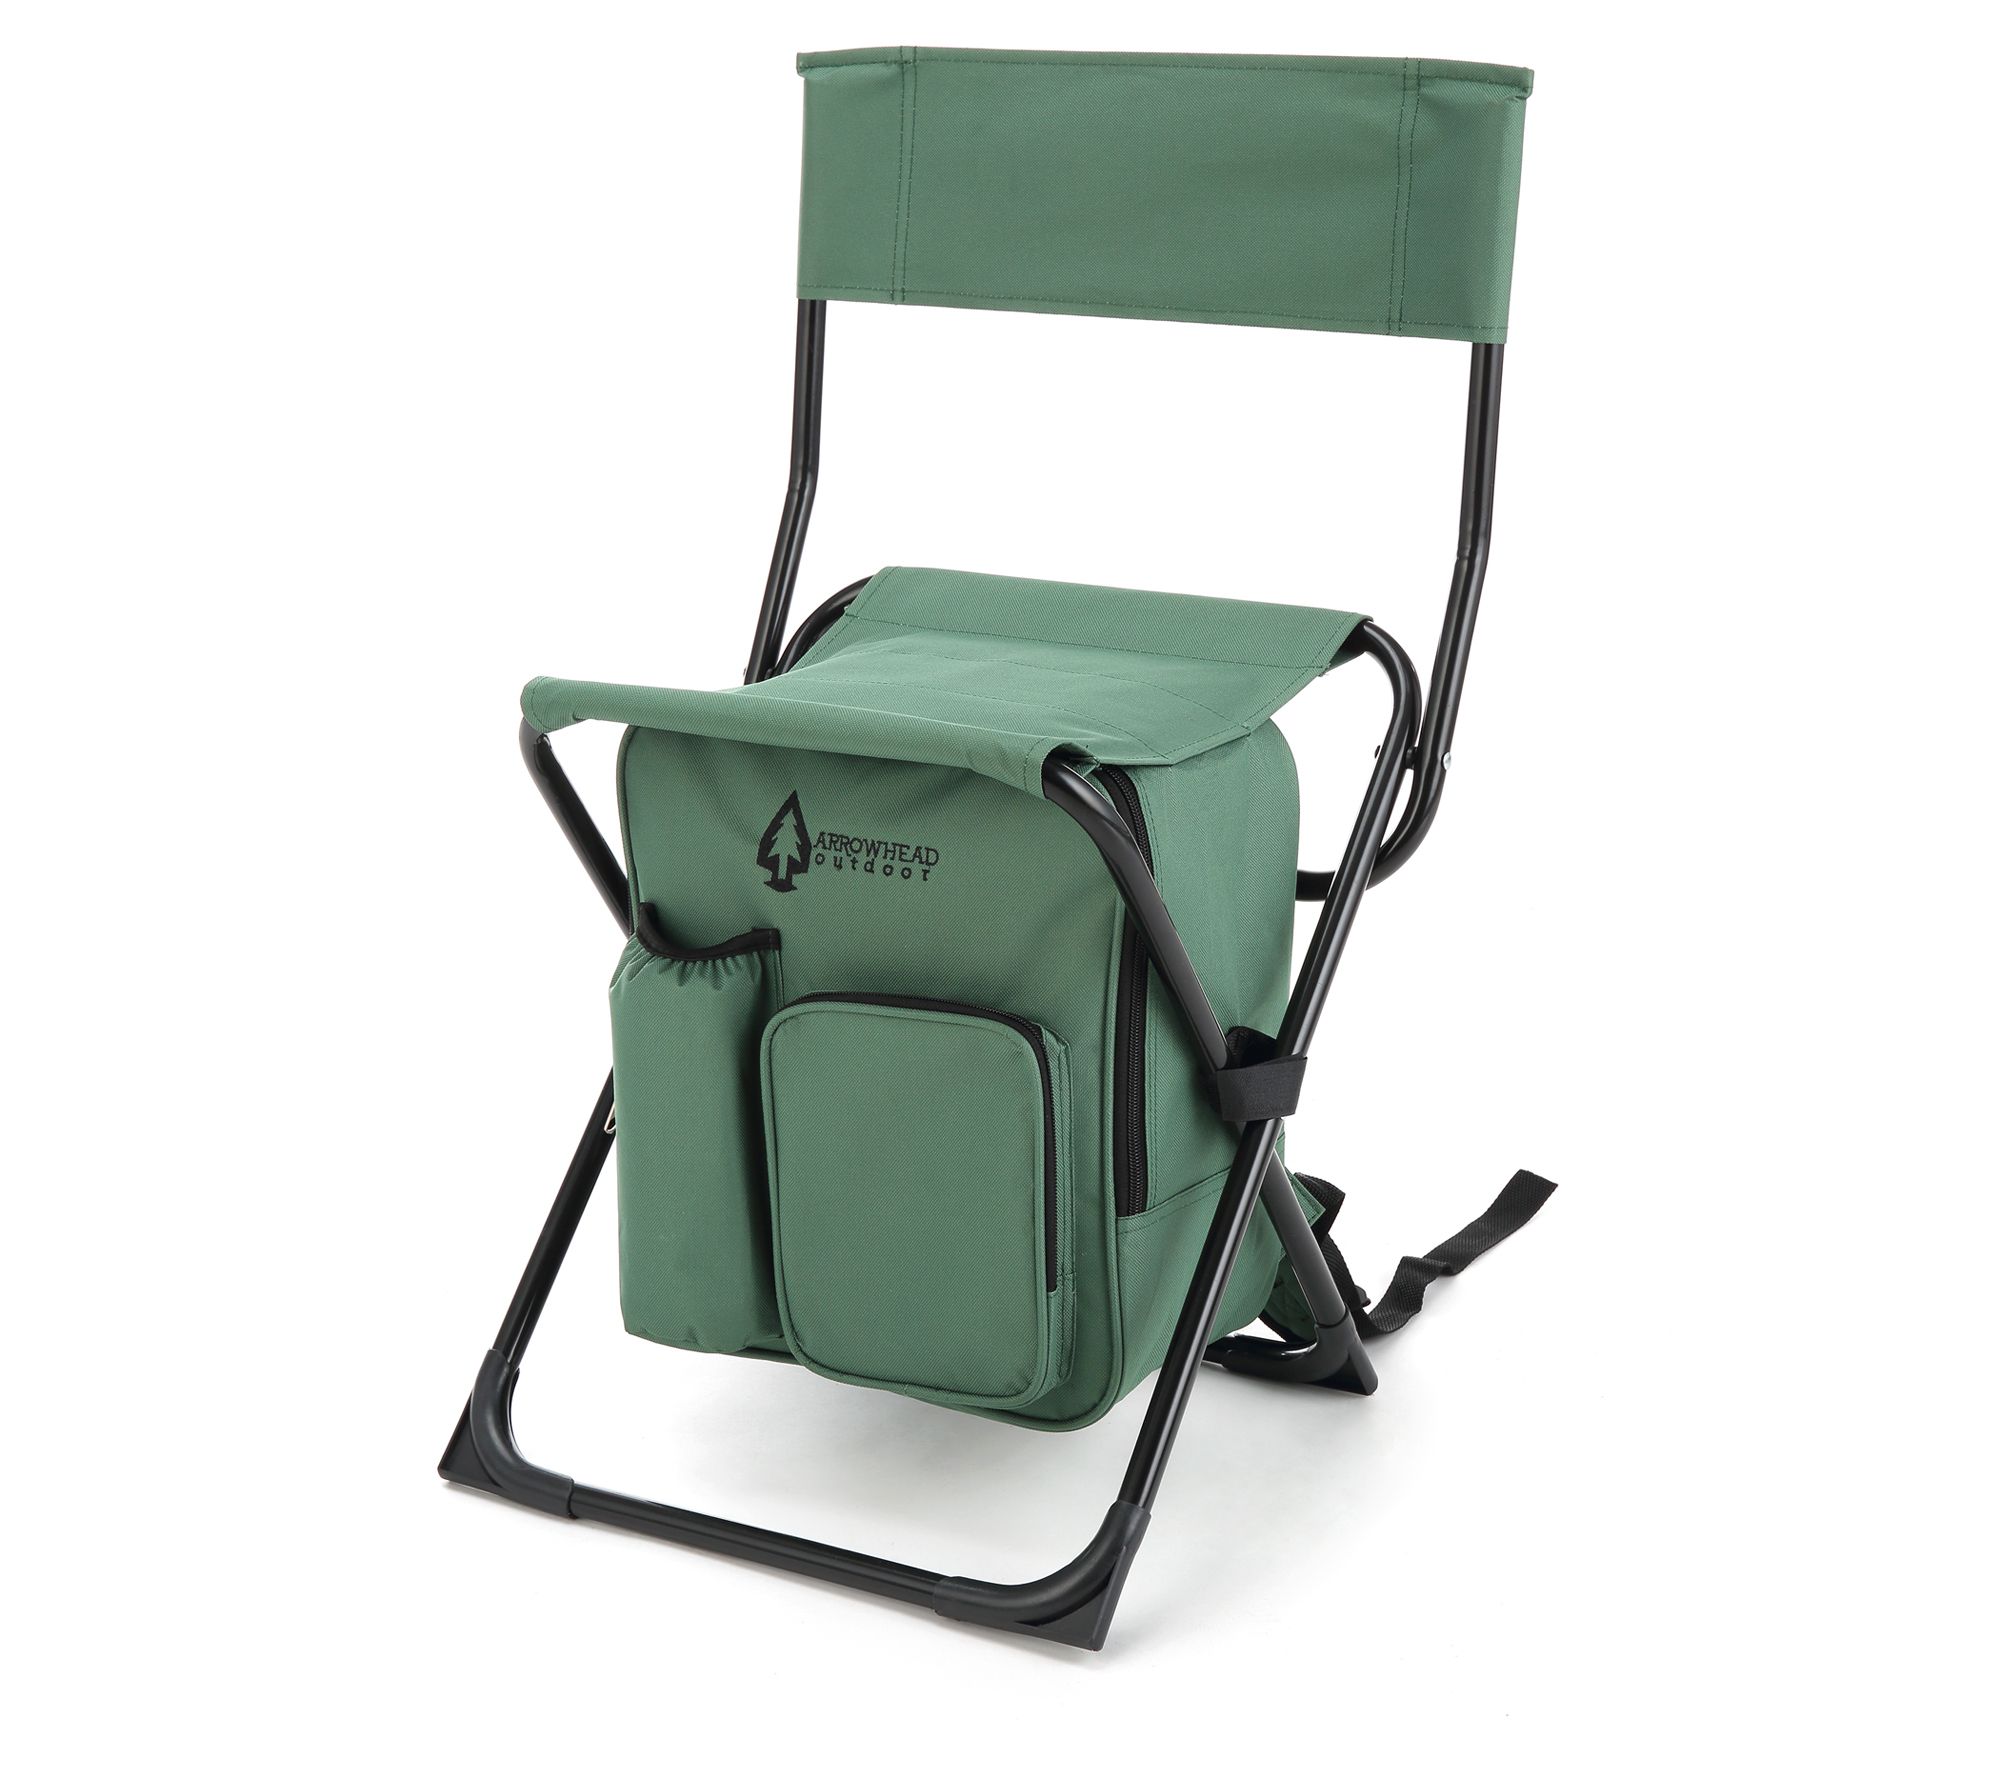 Arrowhead Outdoor Multi-function 3-in-1 Compact Camp Chair